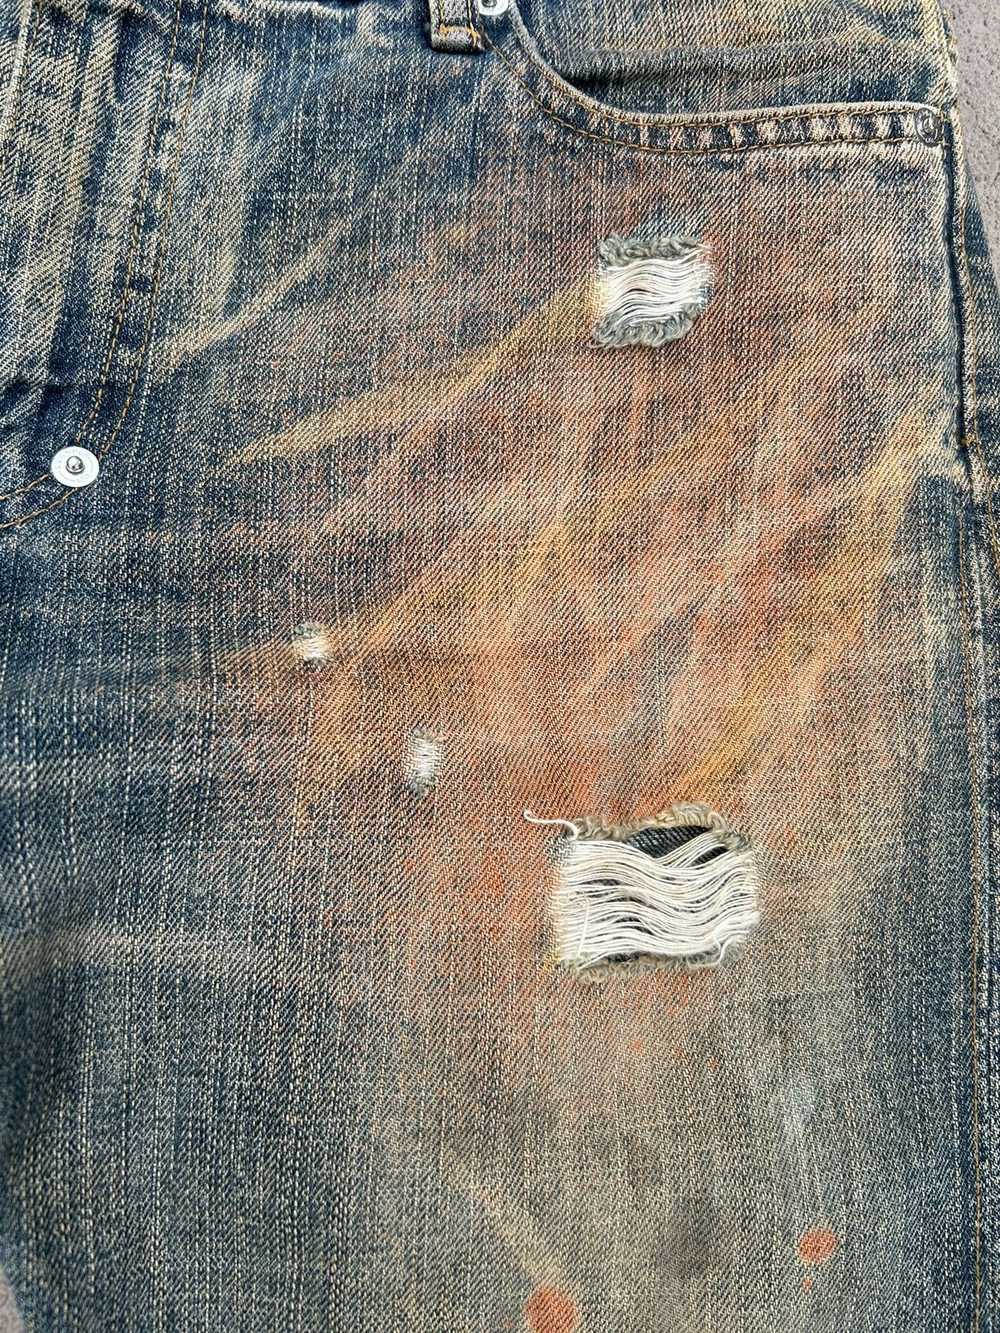 Swagger Swagger dyed selvedge denim jeans - image 3